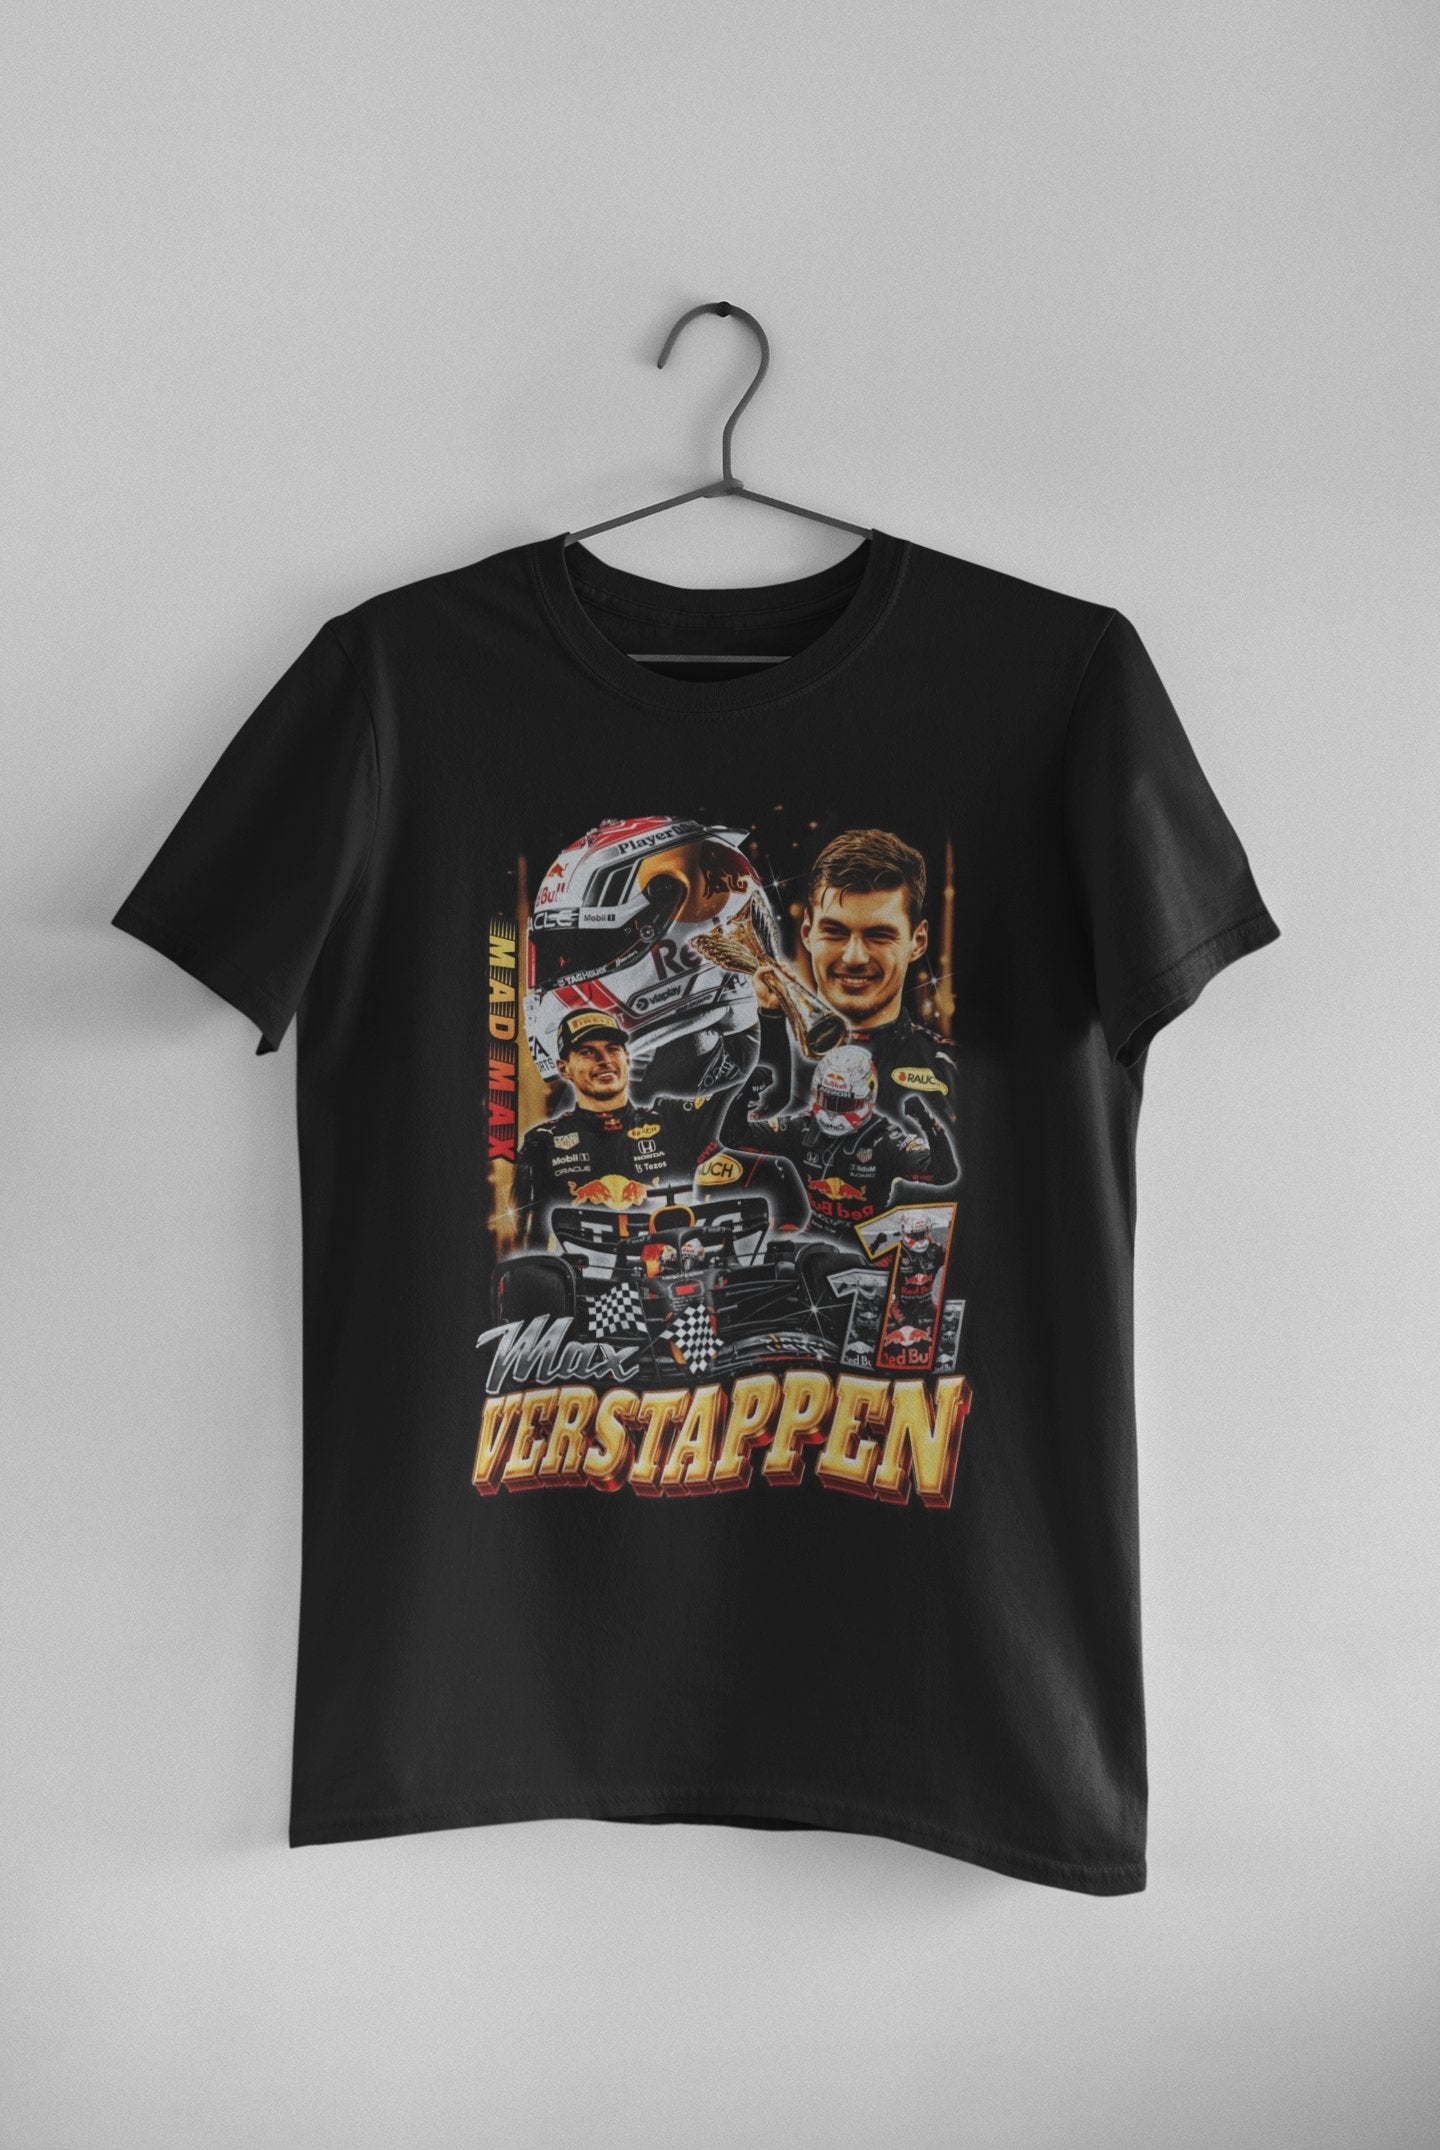 Max Verstappen & Red Bull Racing Polo shirts